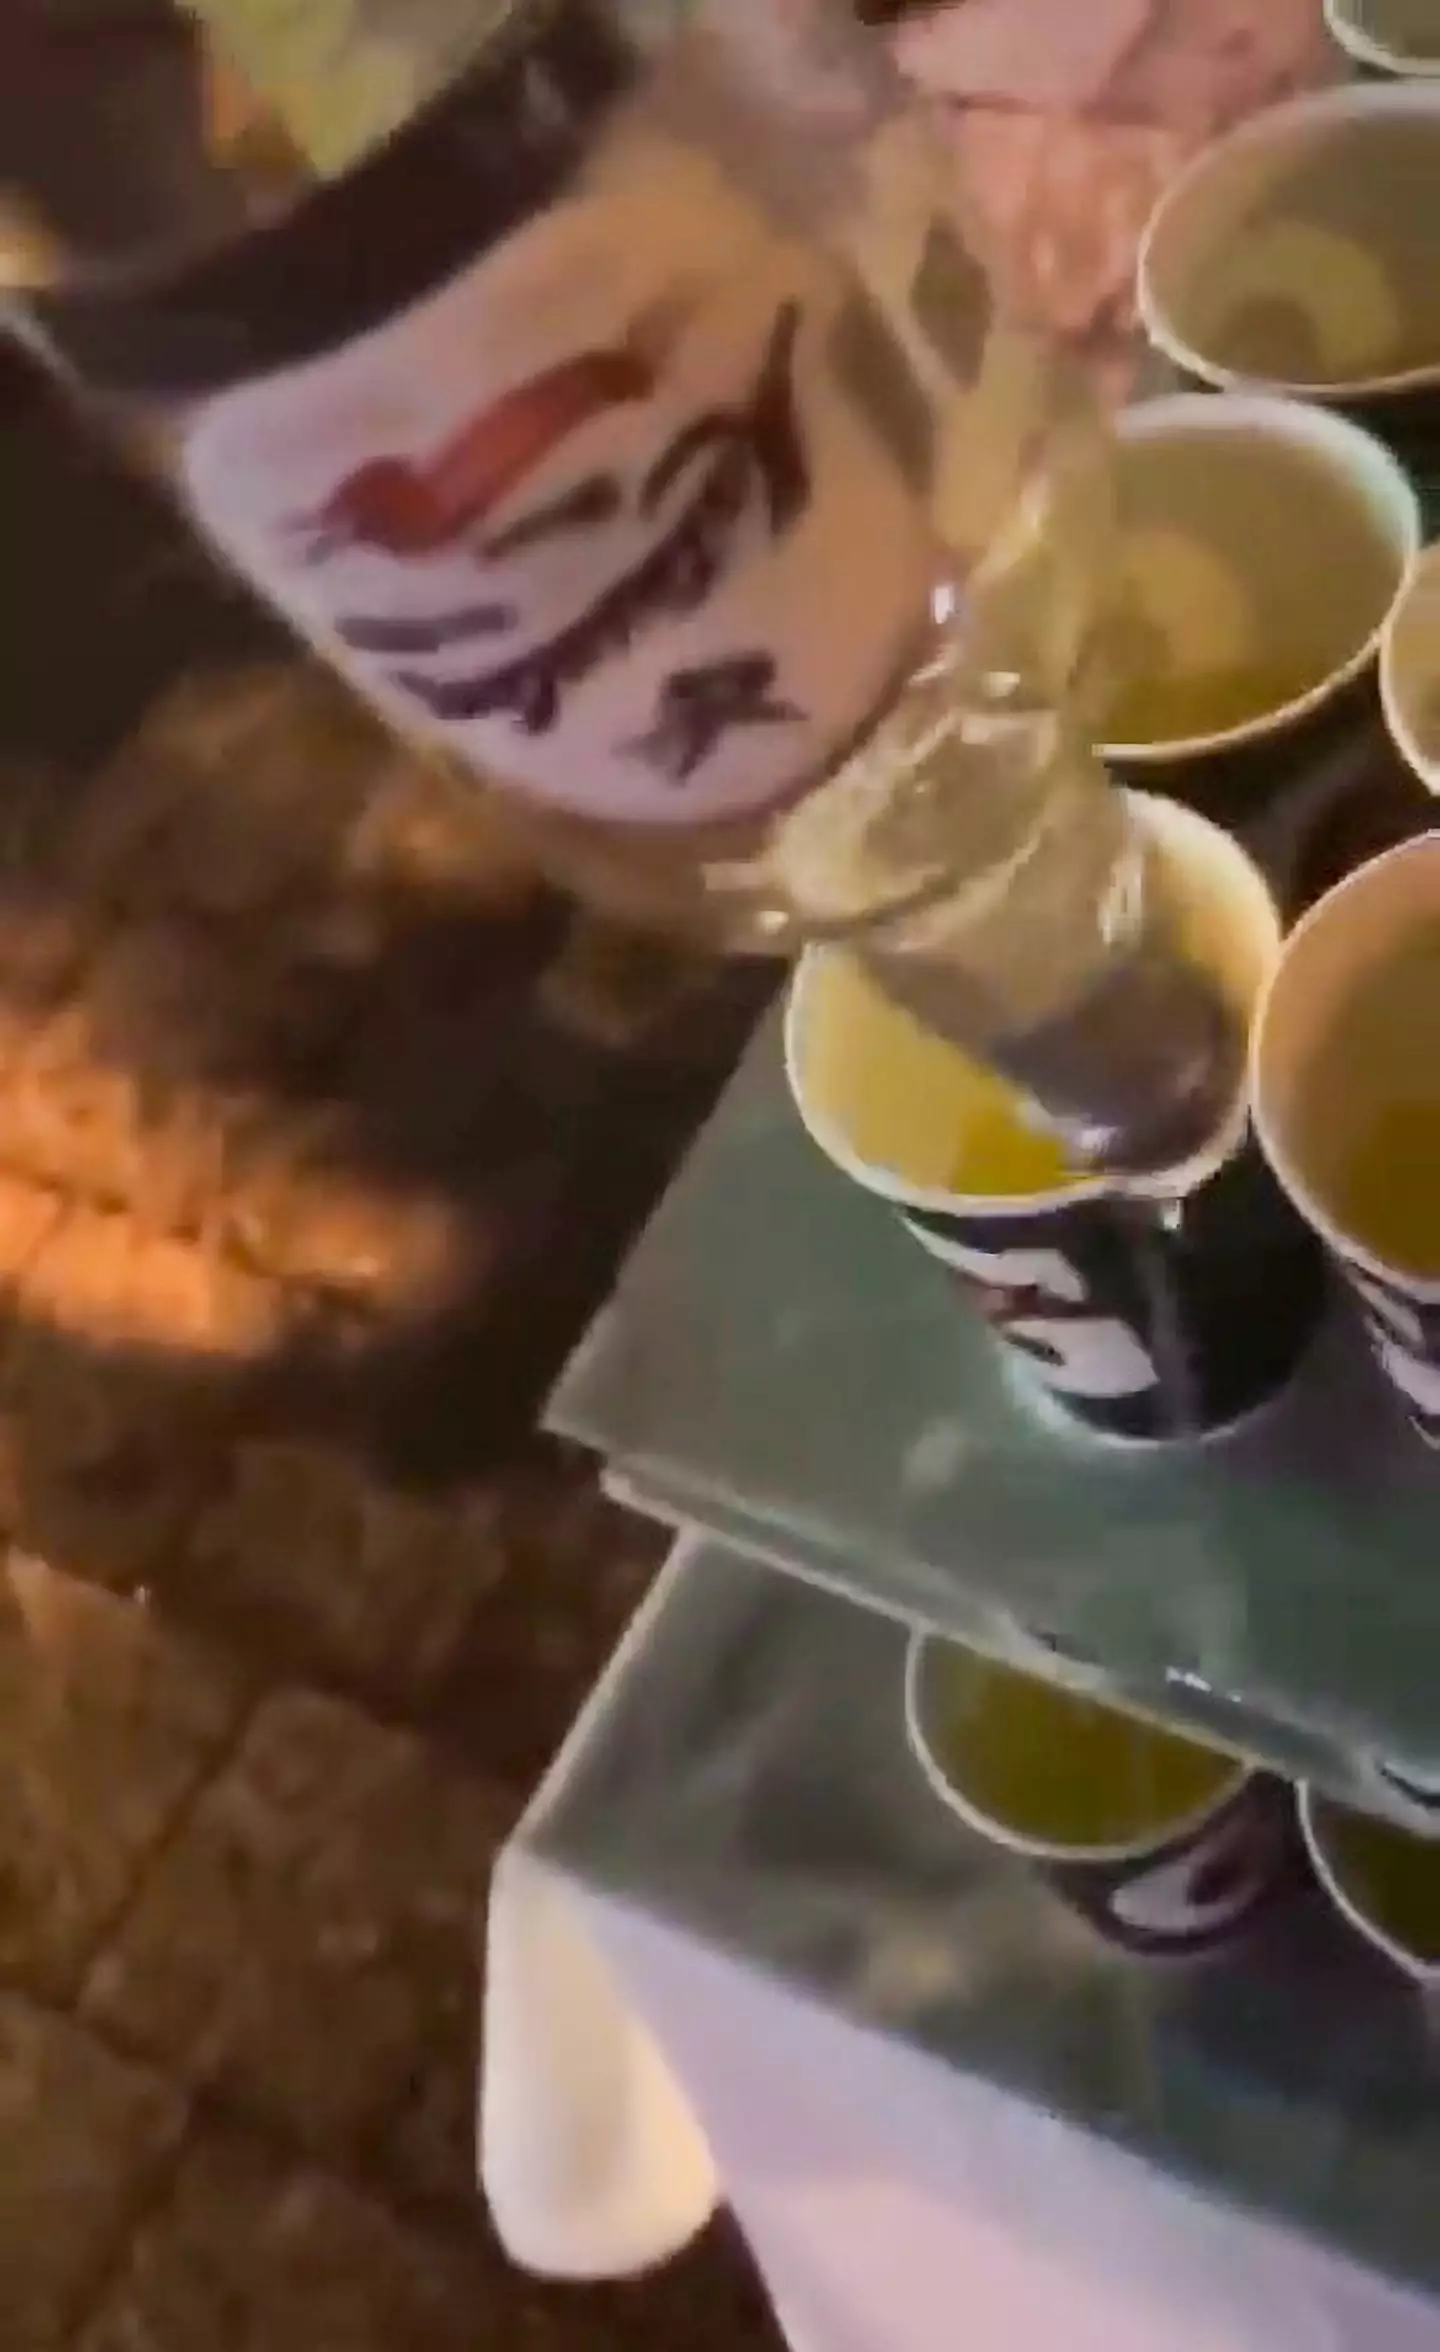 A drunk man in Mexico filmed himself pouring straight rum into runners’ drinks hours before the start of a marathon in Mexico.